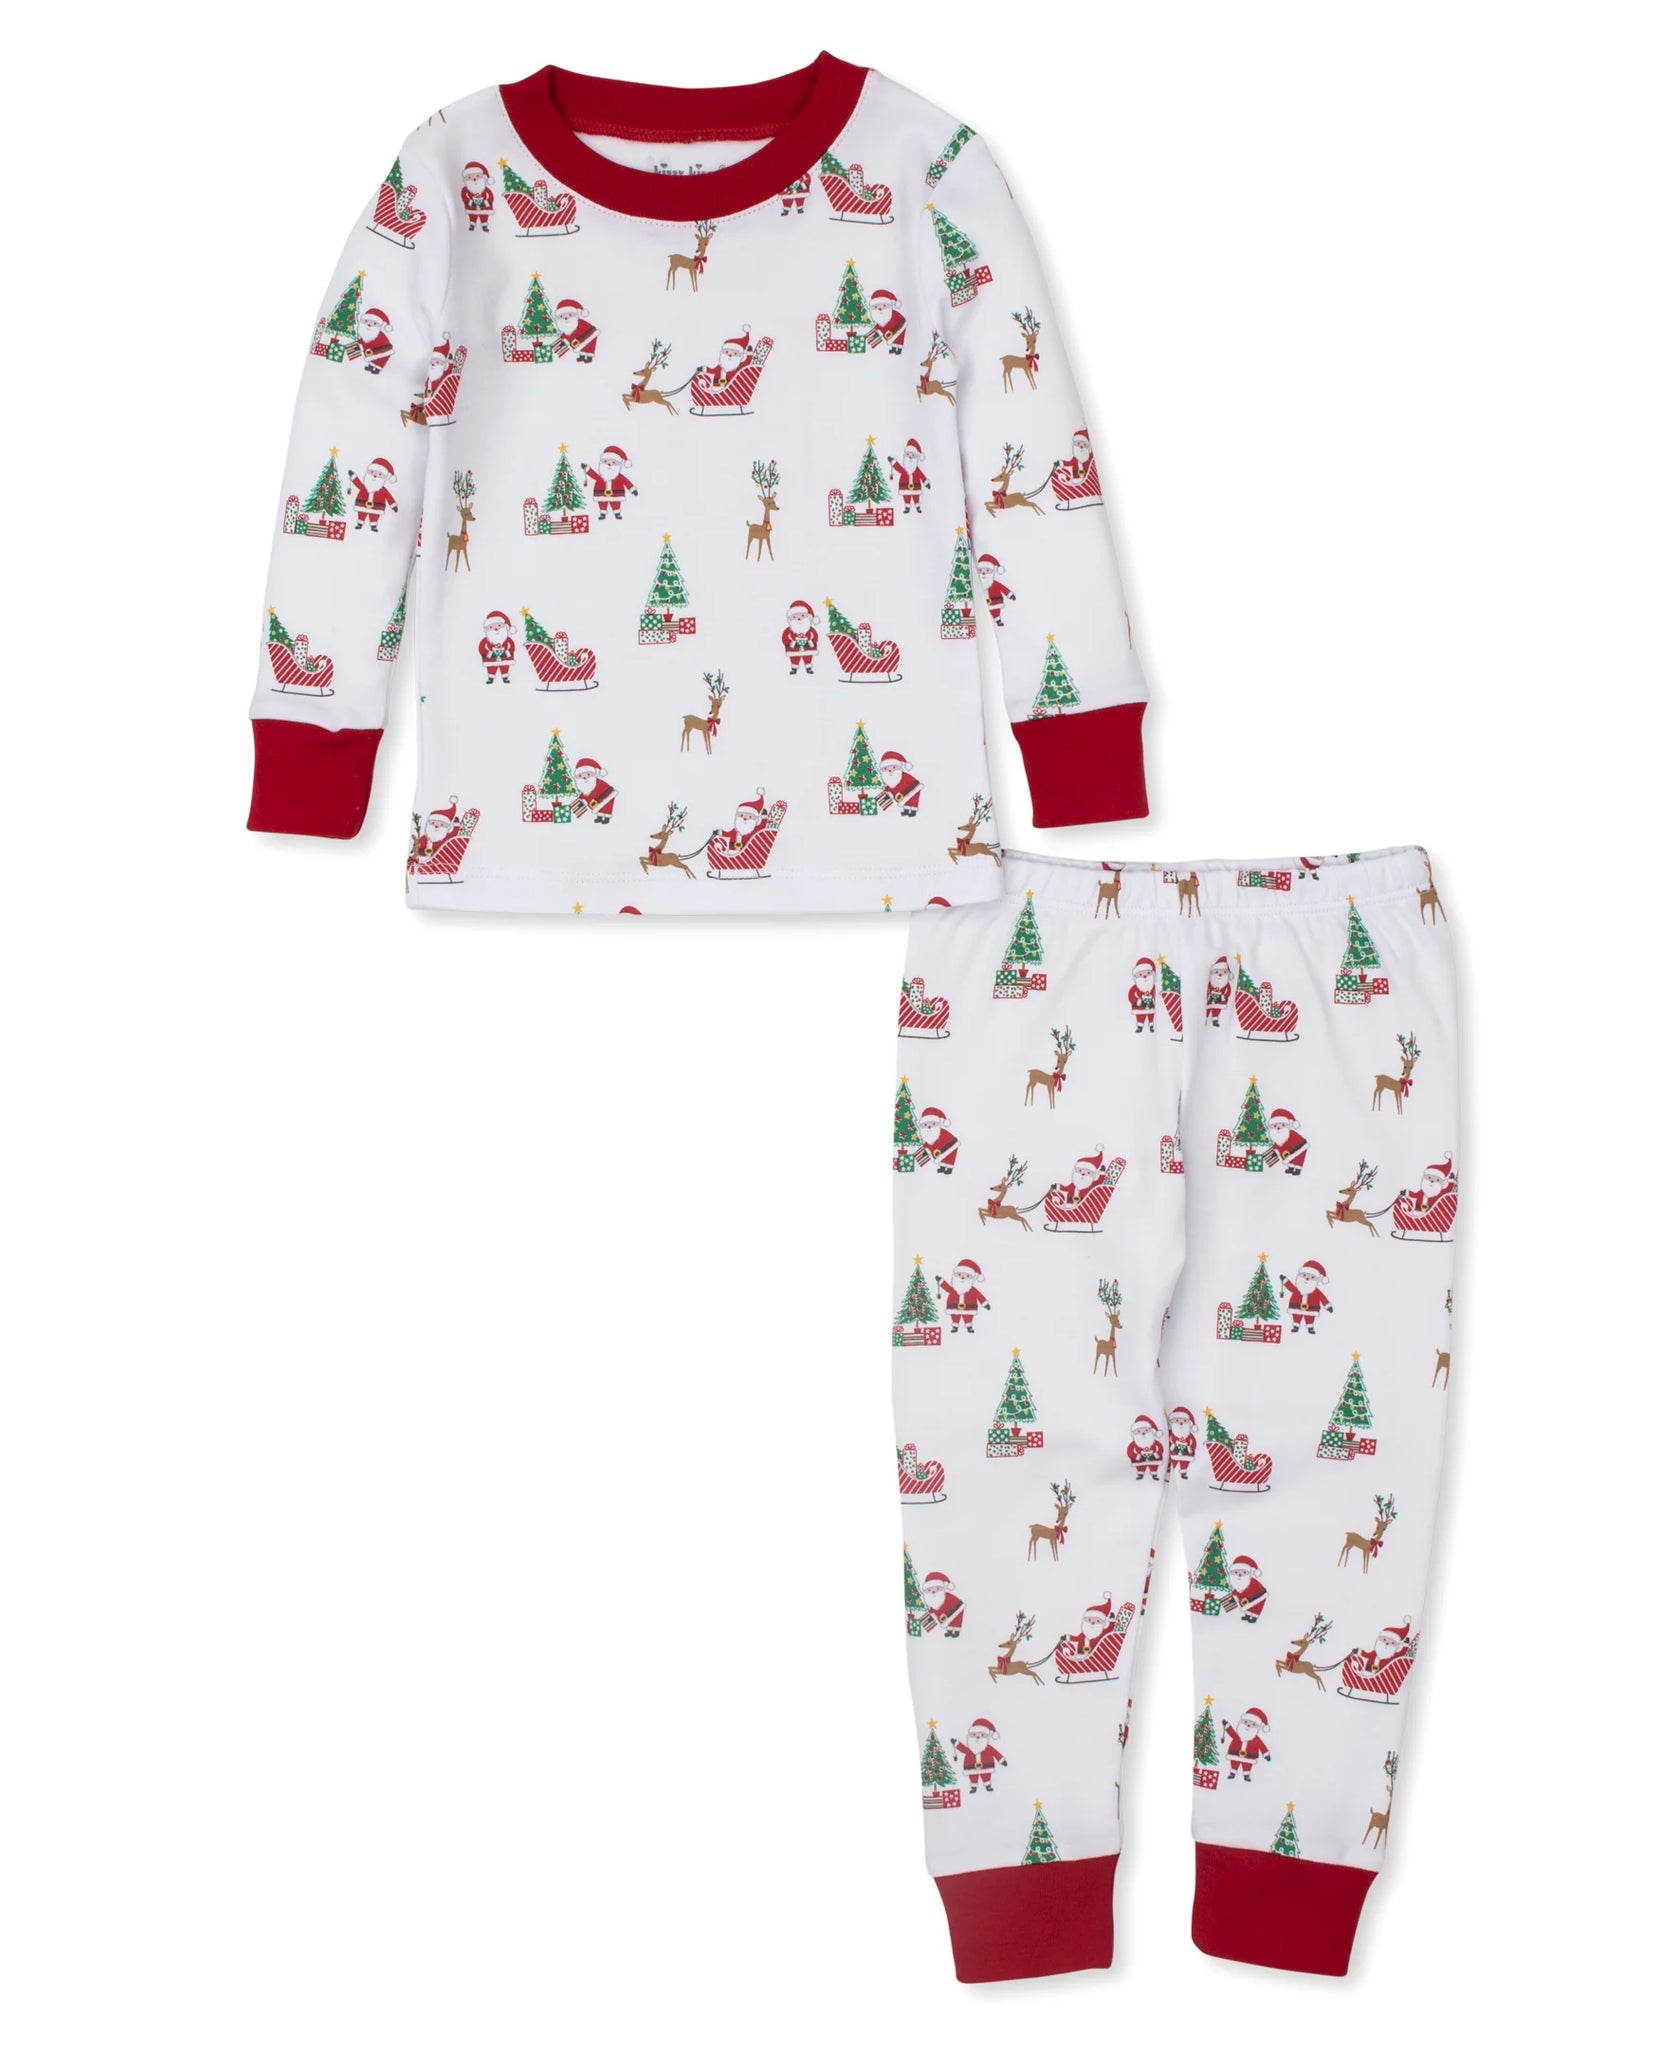 white background with santa sleighs, christmas trees, reindeer with red contrast cuffs